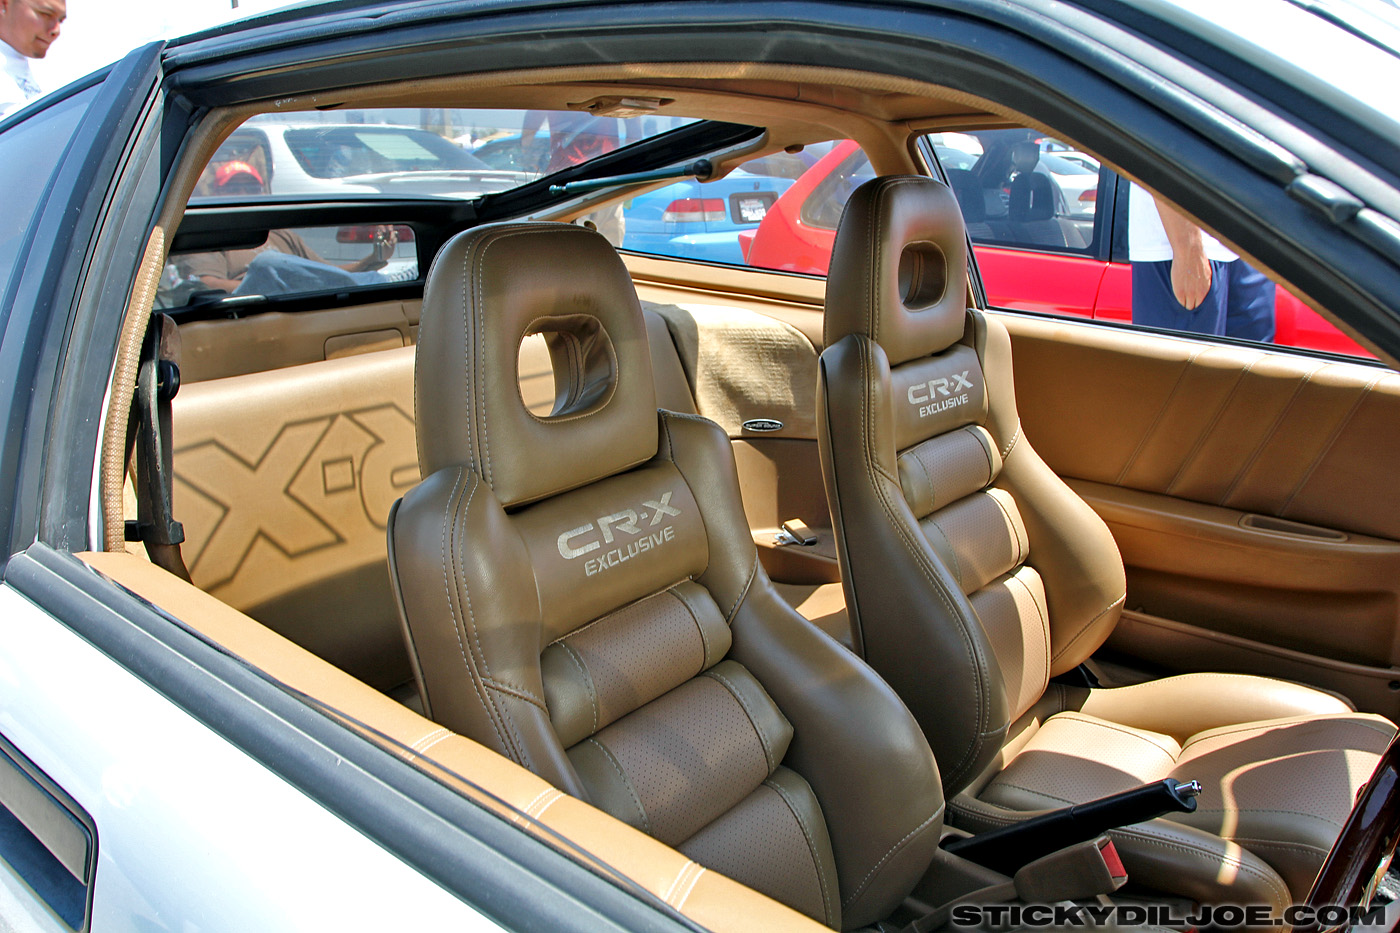 Look at the seats, pretty mint considering the age of the car. 